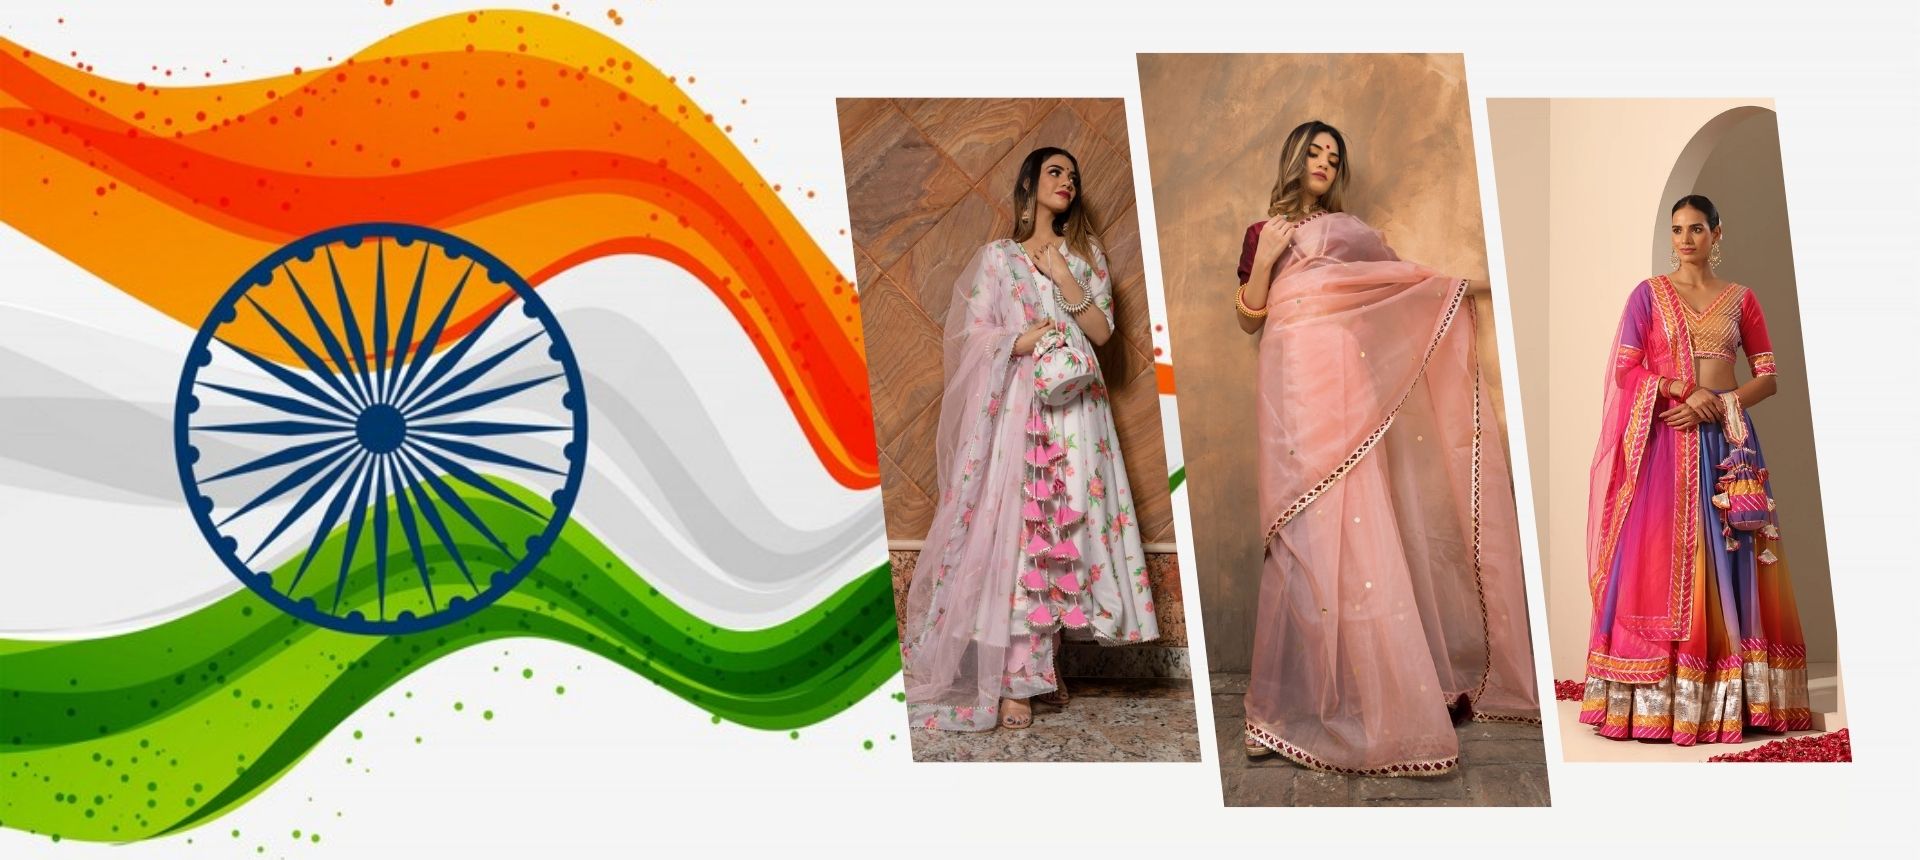 Dressing Up for Republic Day